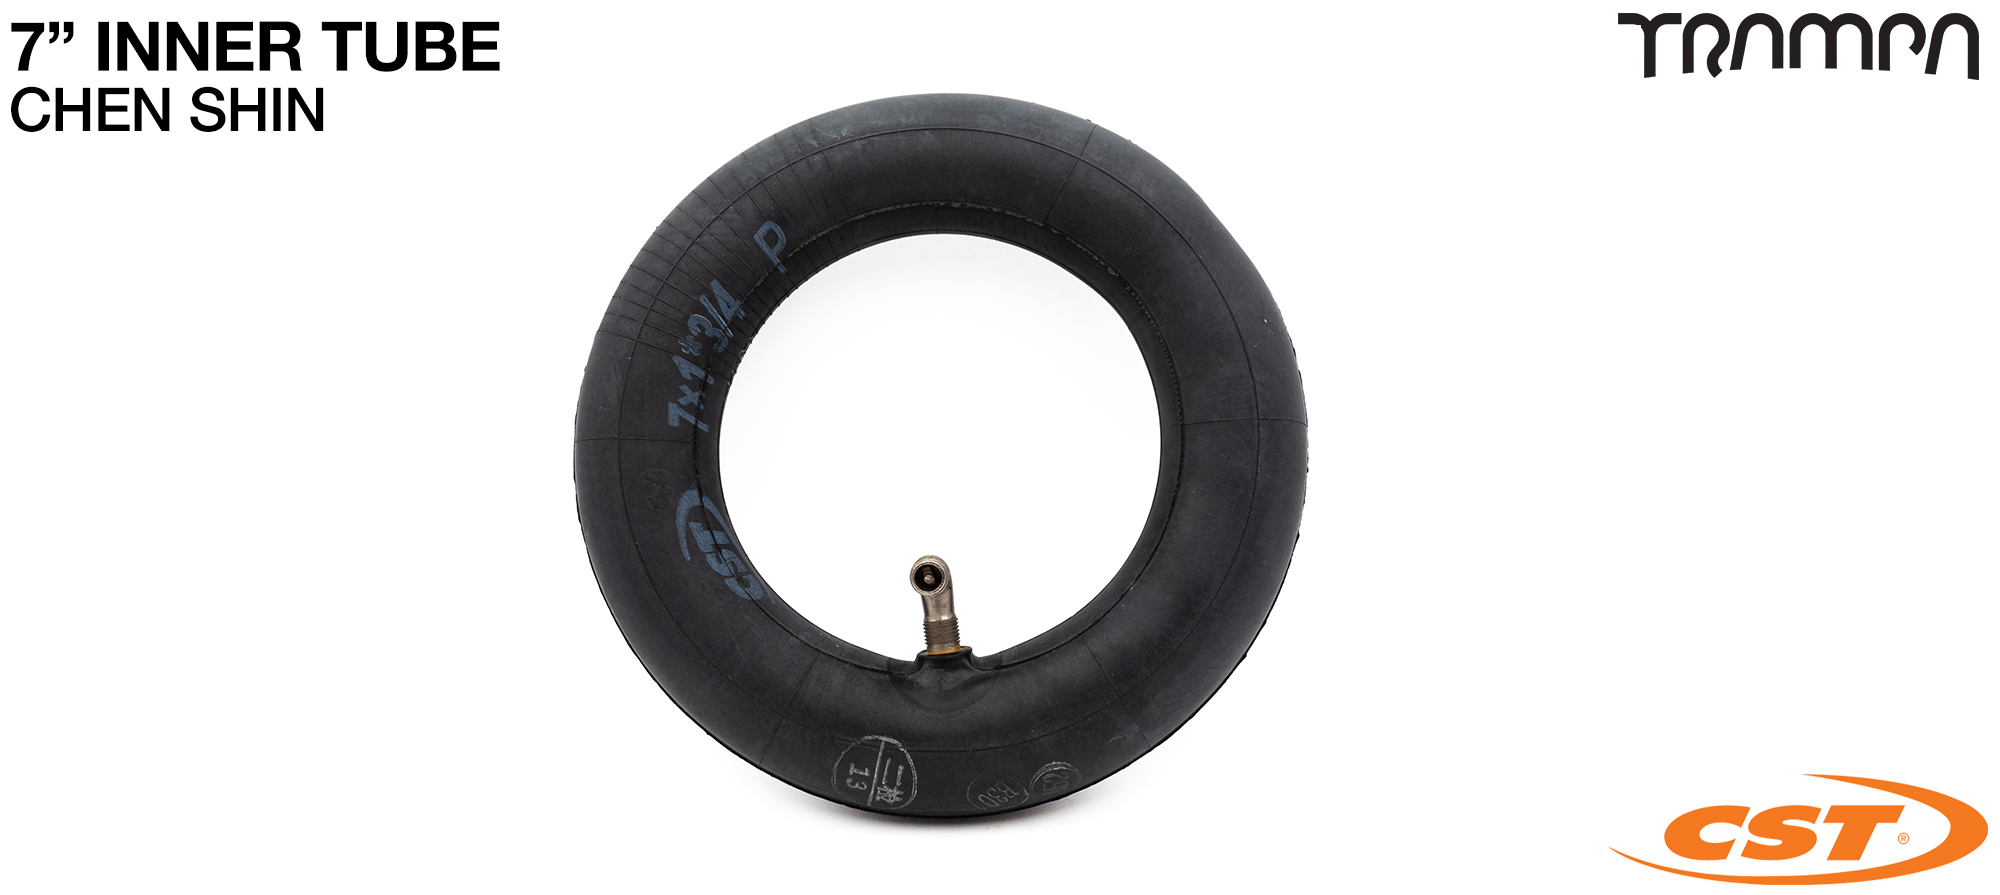 7 Inch Inner Tube CST 7x13/4 inch 175x45mm SILVER Valve - fits 3.75 inch Rims & 7 inch tyres